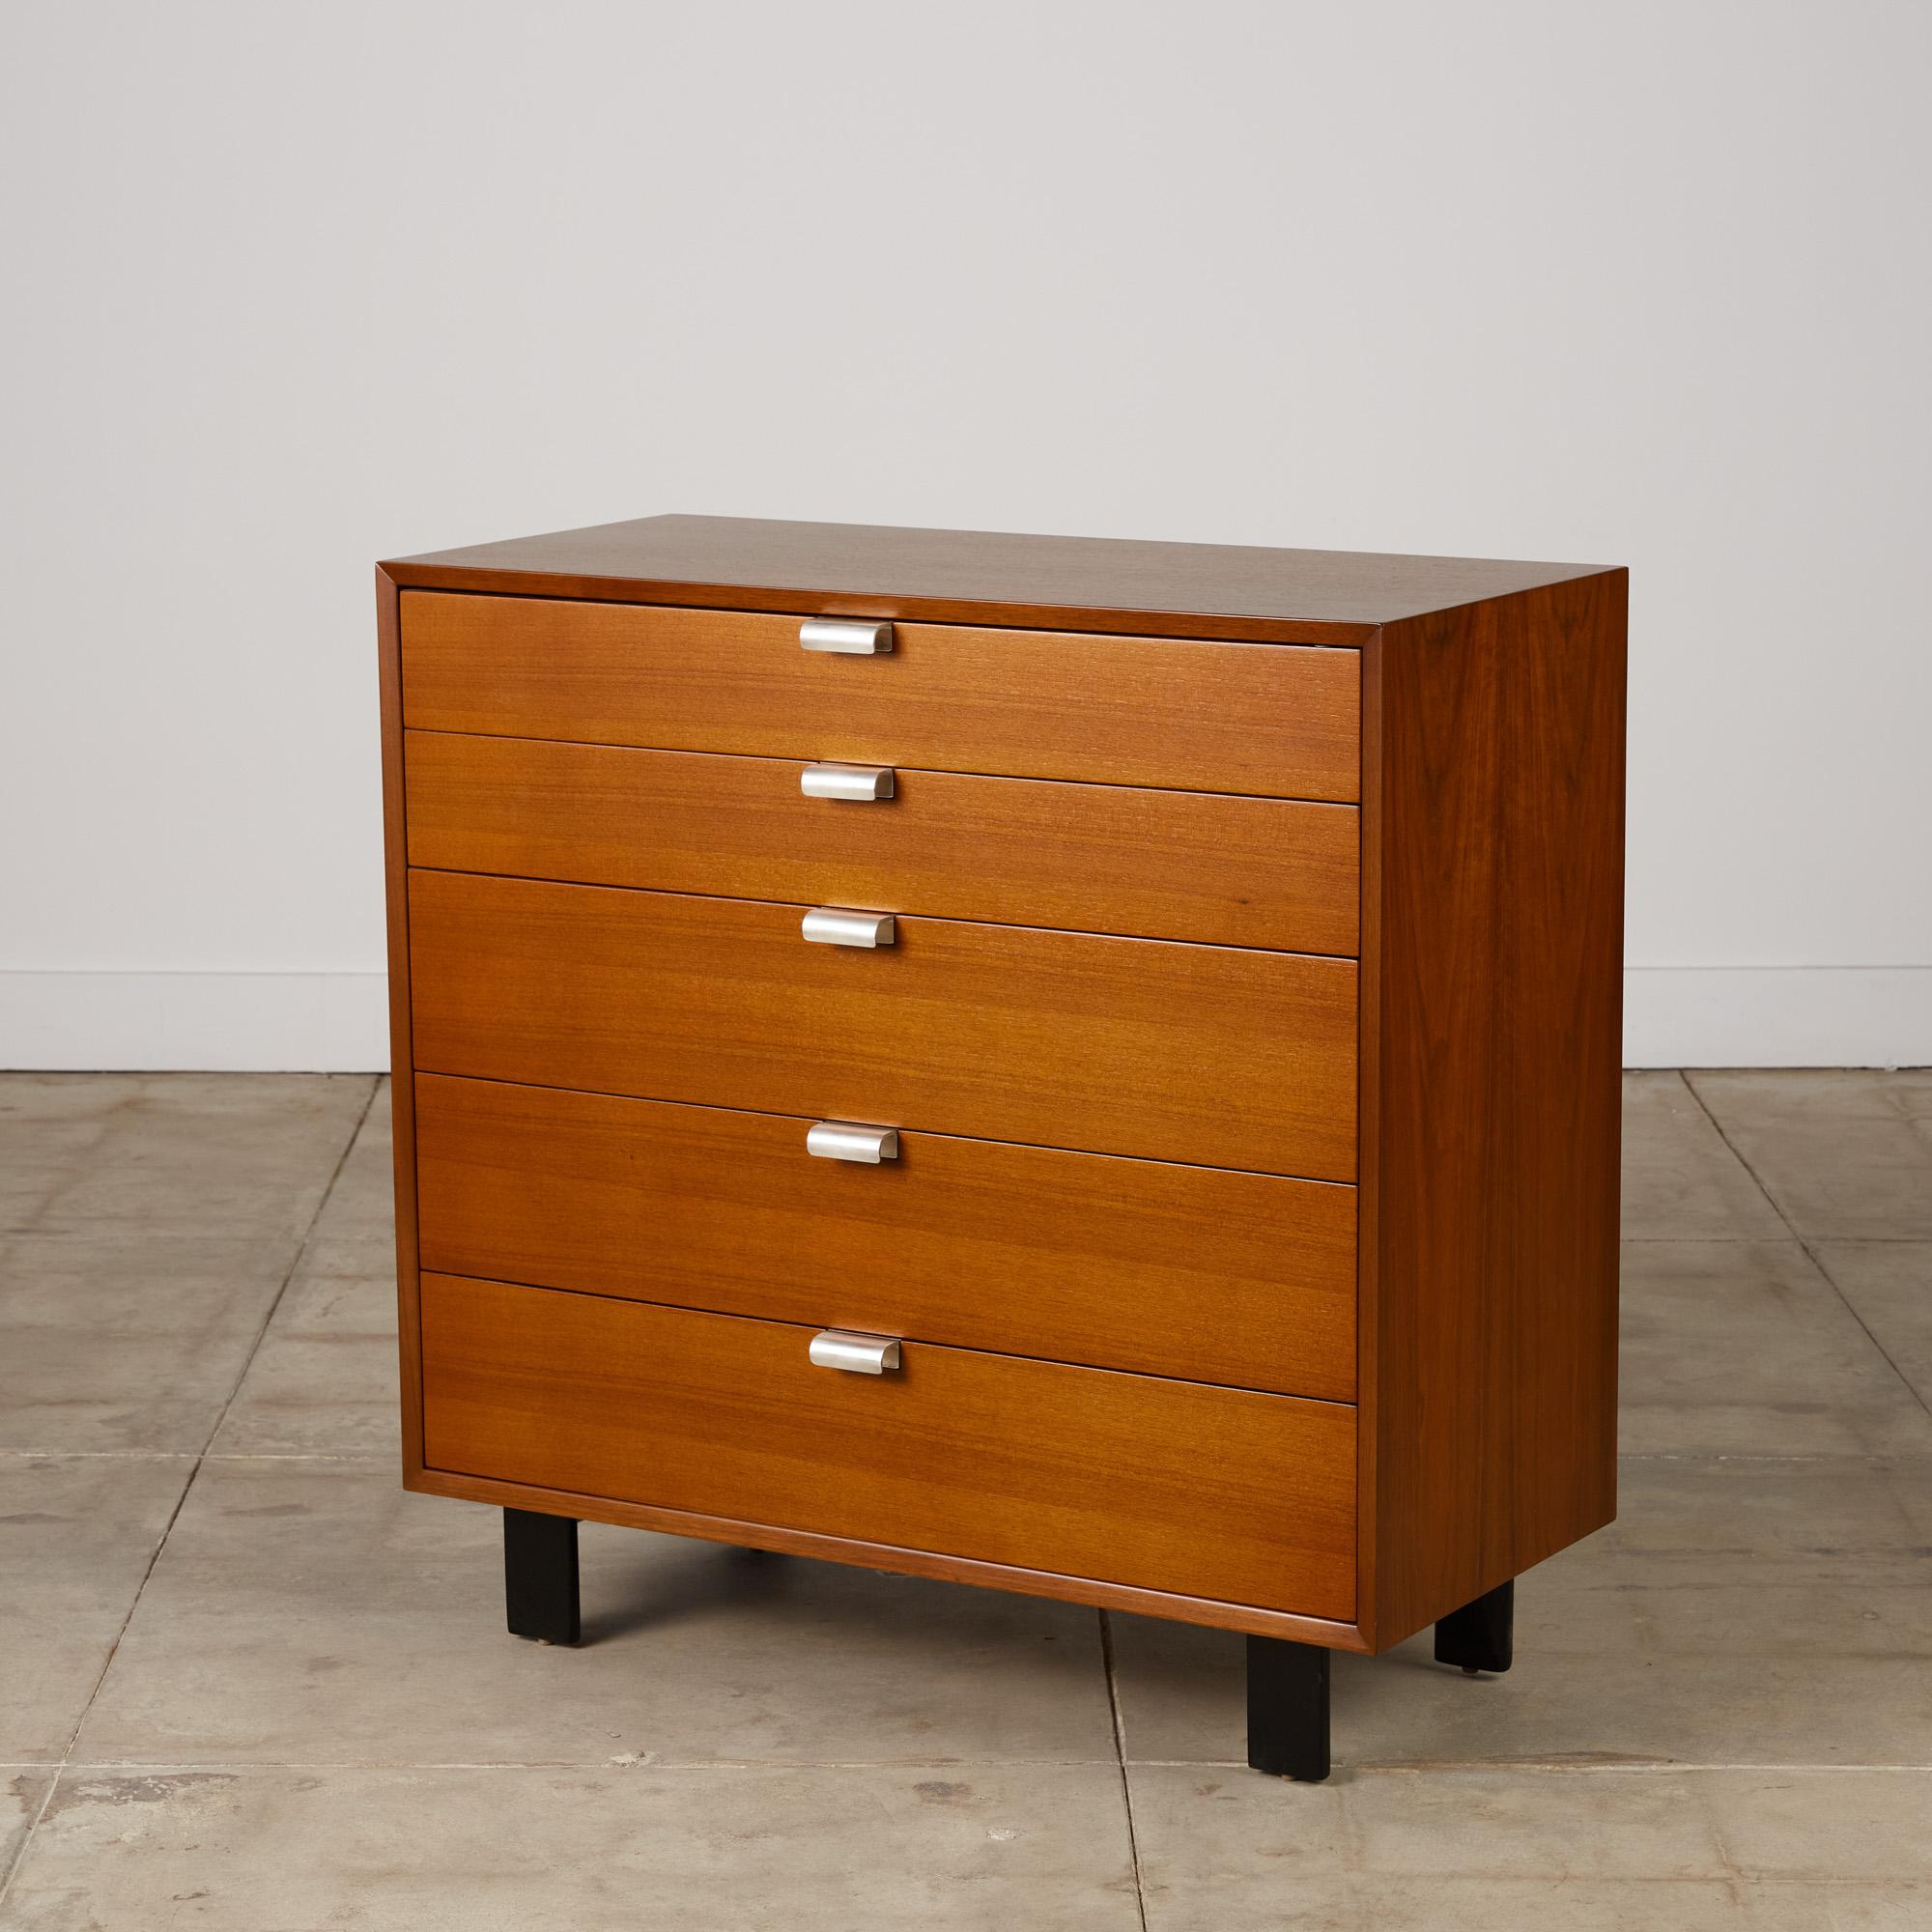 Dresser by George Nelson for Herman Miller, c.1950s. This five-drawer dresser features a walnut frame with sculpted aluminum pulls and sits atop a black plinth with four short black legs. The top drawer features separations for smaller belongings